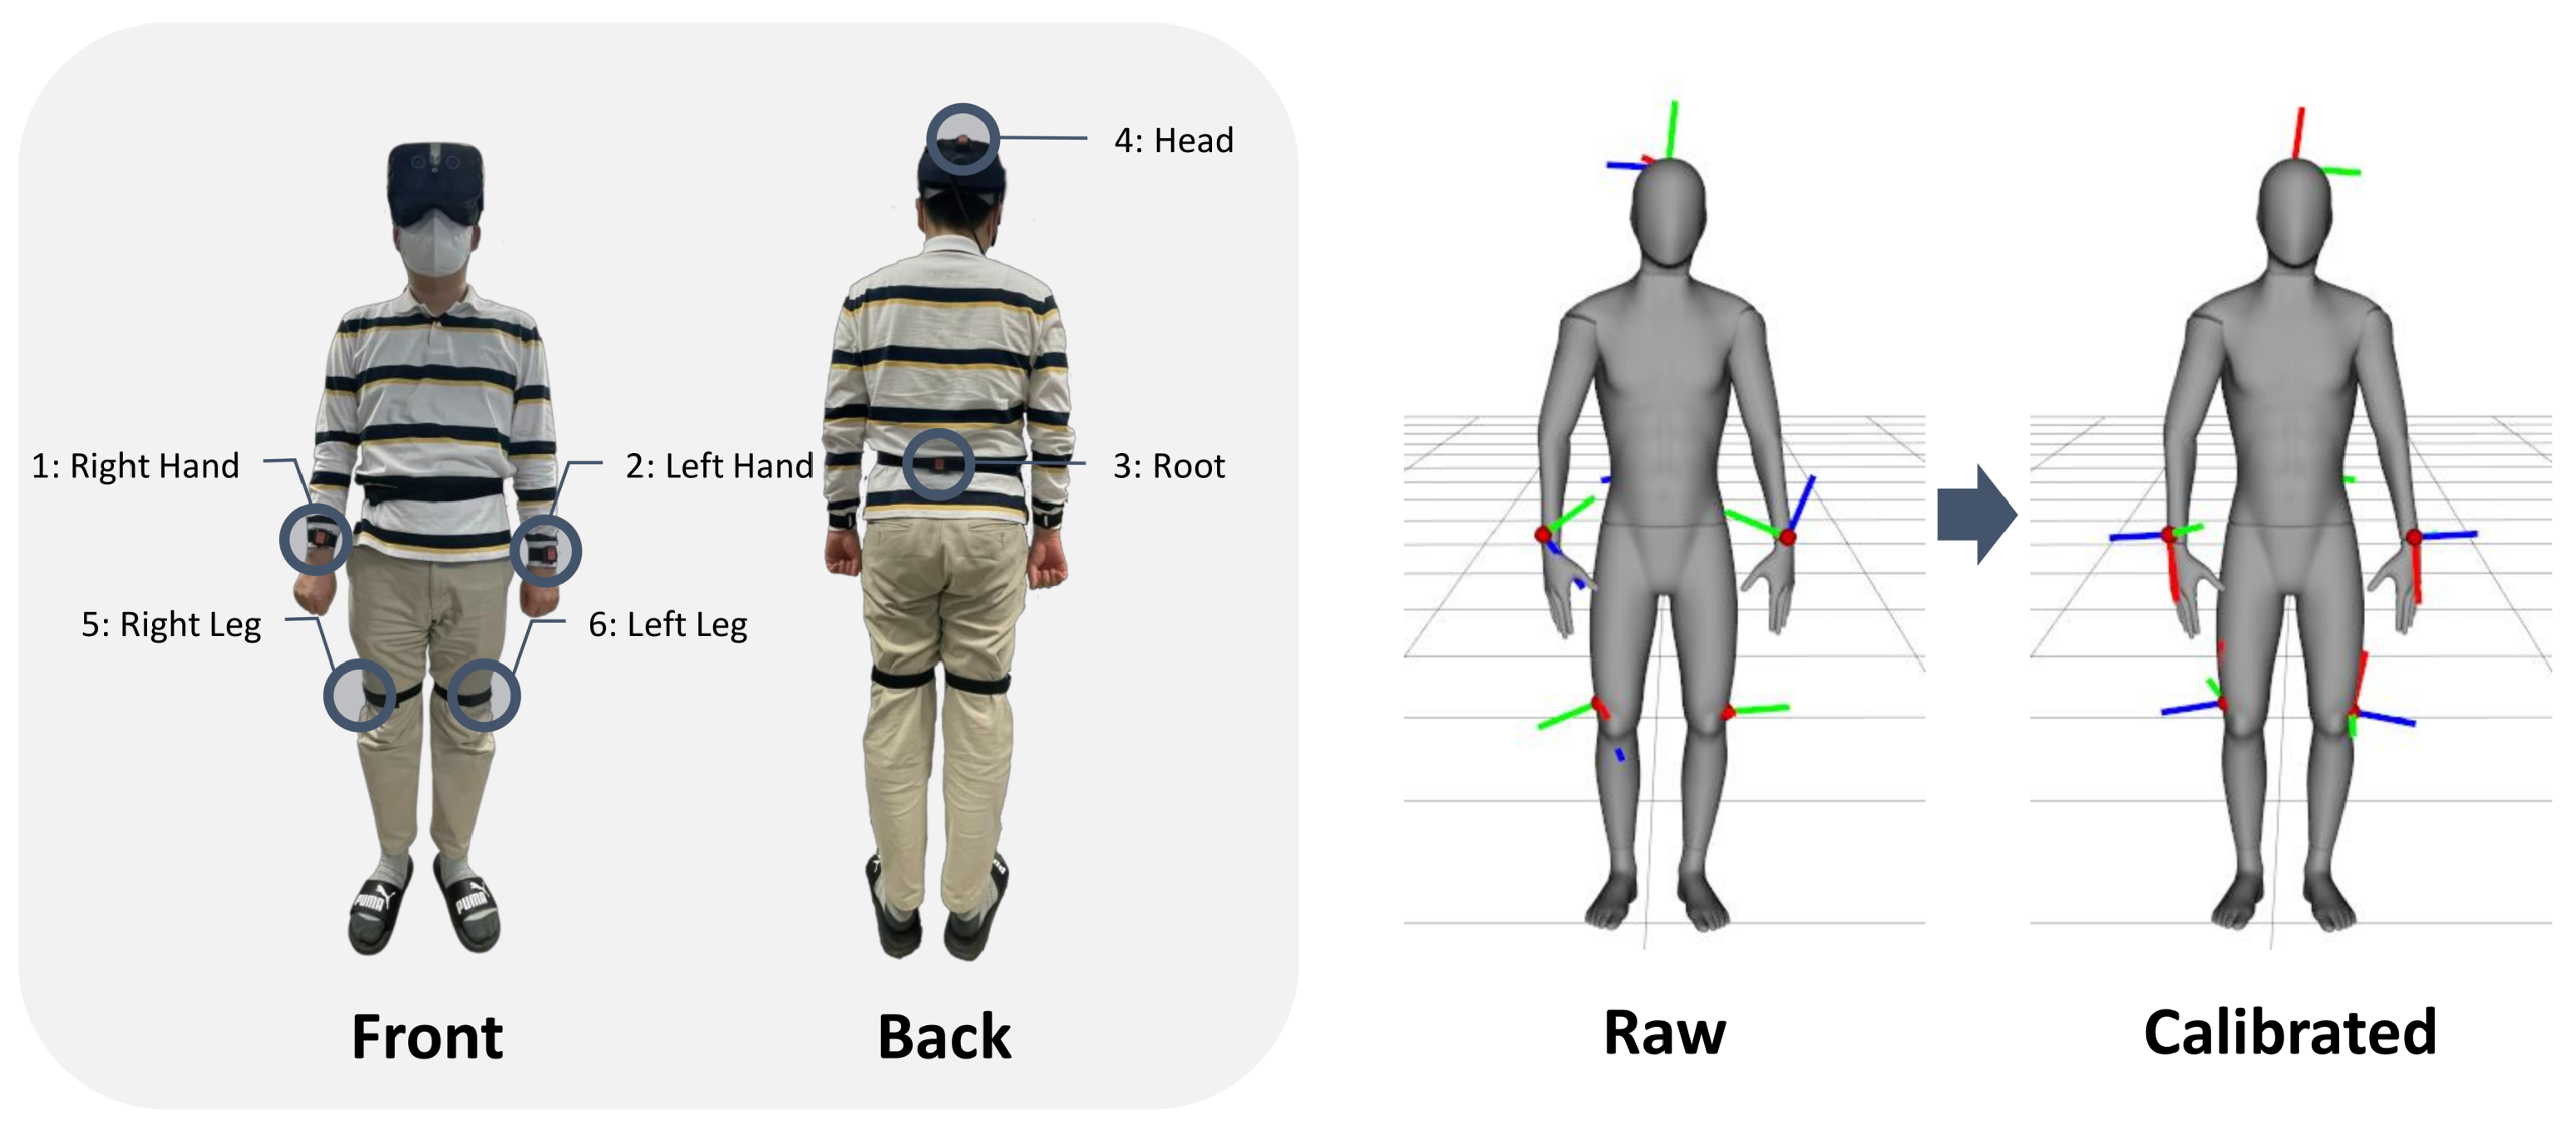 Computer Vision and Pose Estimation for Fitness / Rehab Therapy Apps